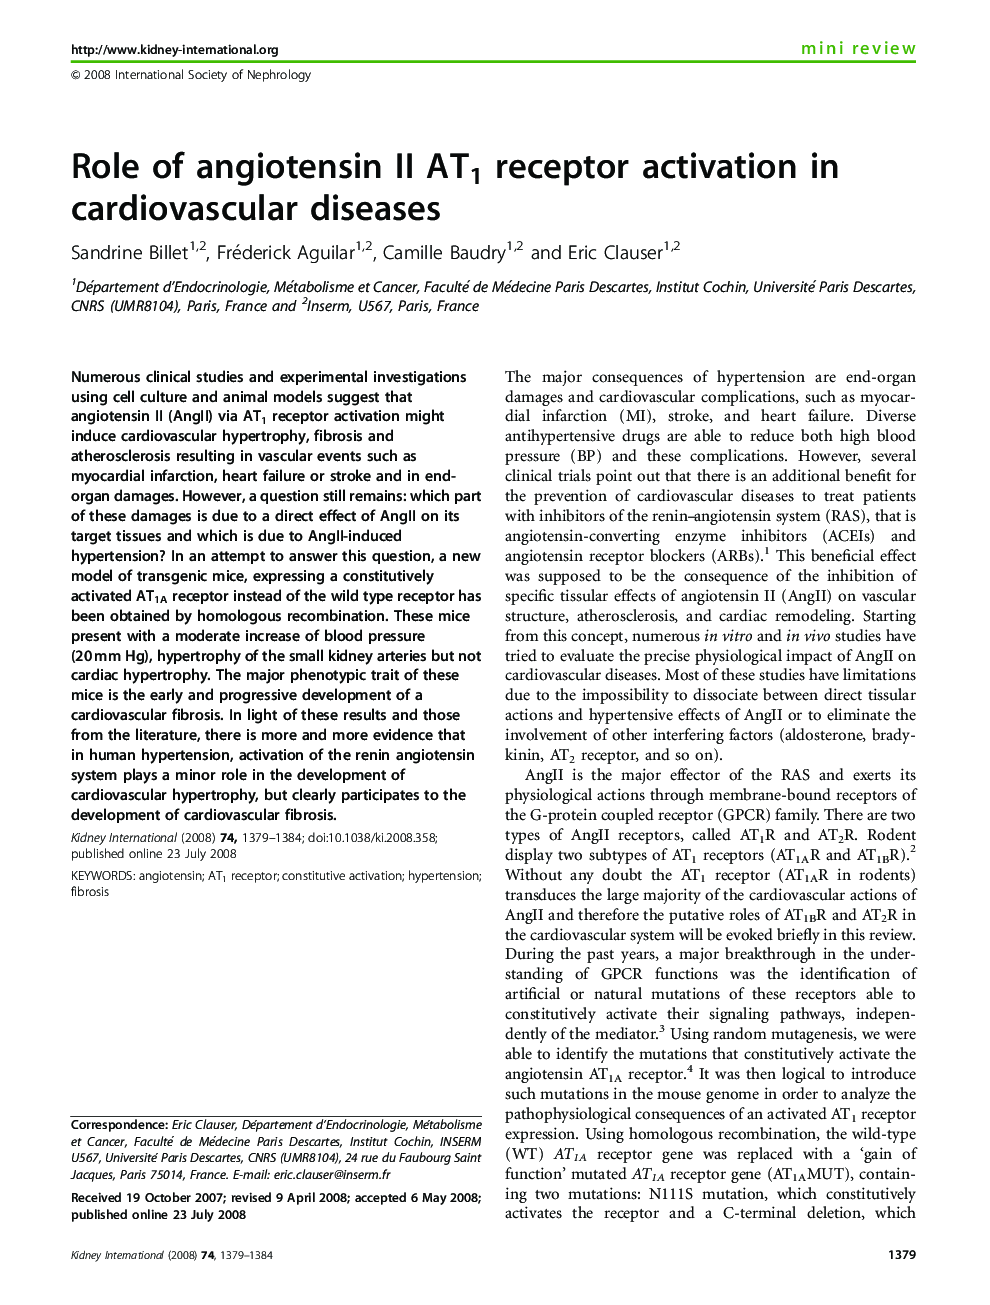 Role of angiotensin II AT1 receptor activation in cardiovascular diseases